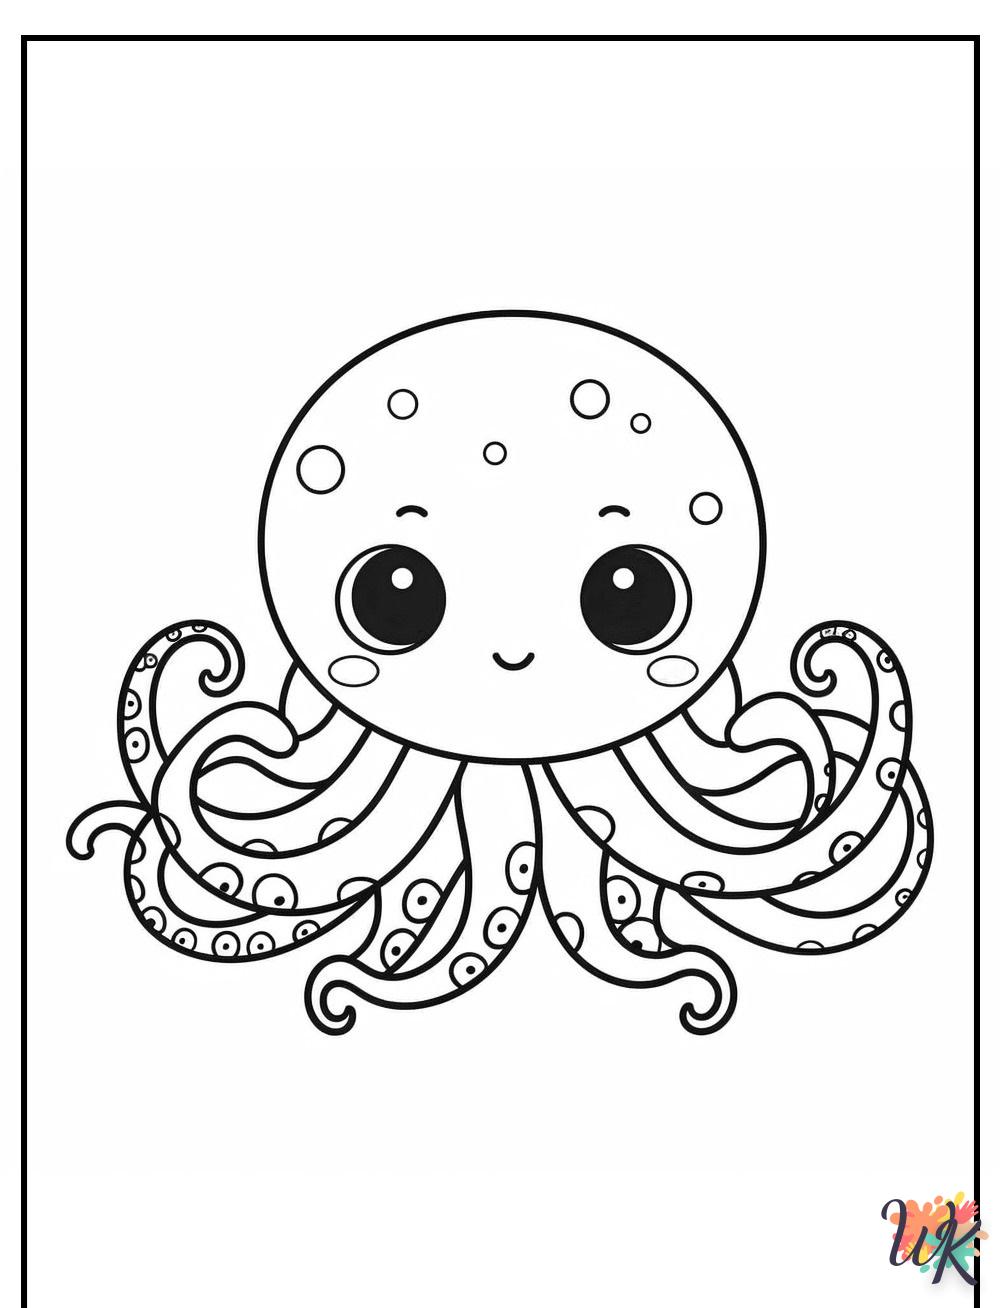 Octopus coloring to draw online